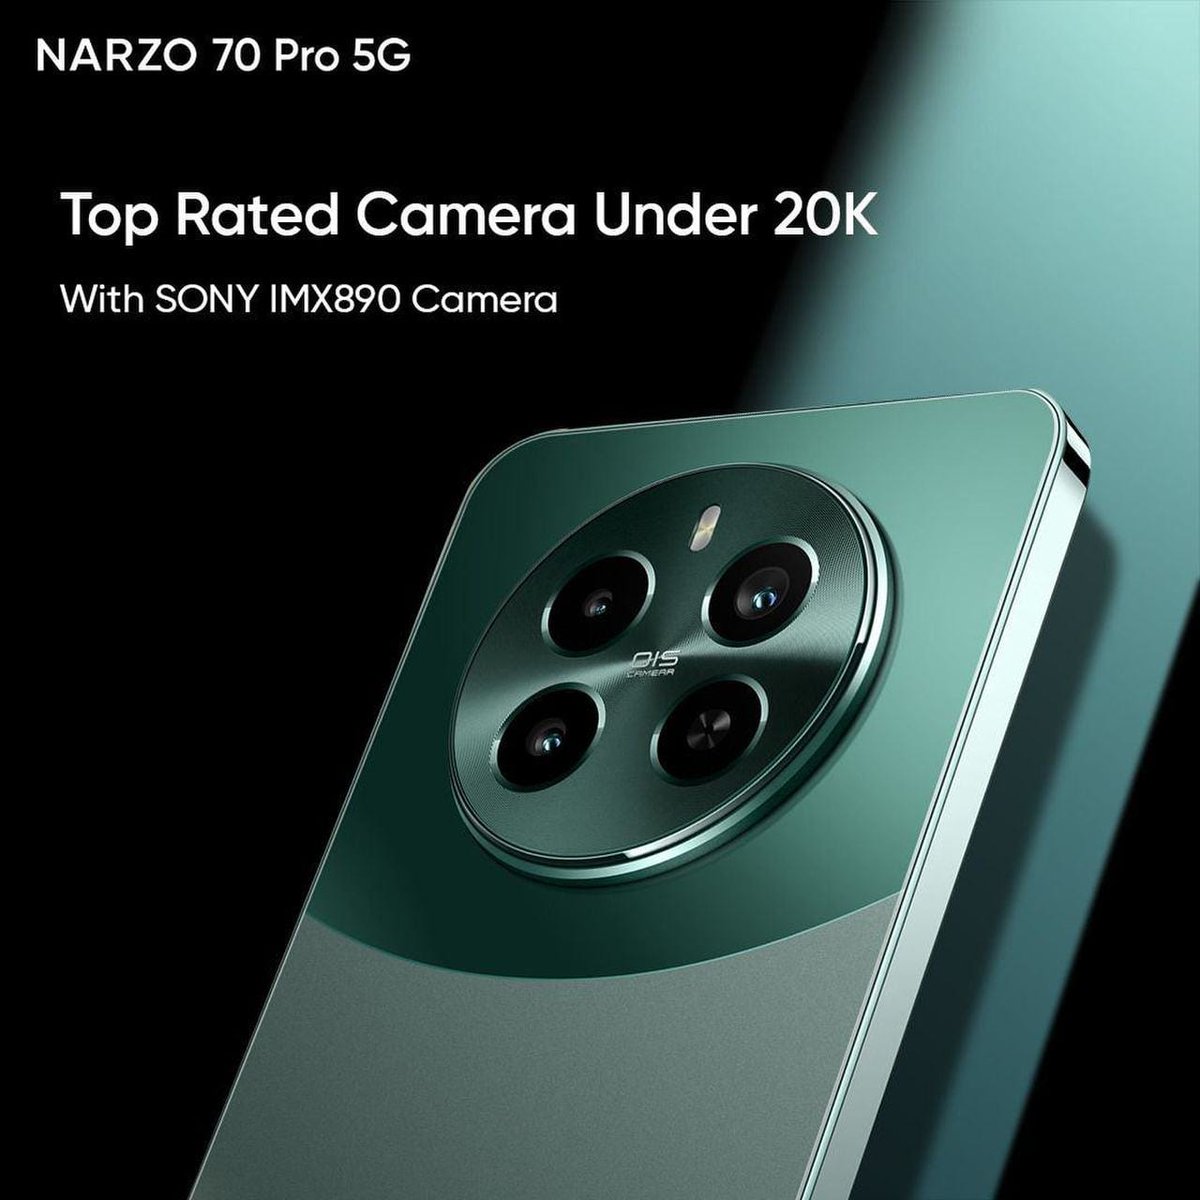 It's time to appreciate the #NARZO70Pro5G for its outstanding camera capabilities. And let's not forget that stellar camera with the Sony IMX 890 Sensor.